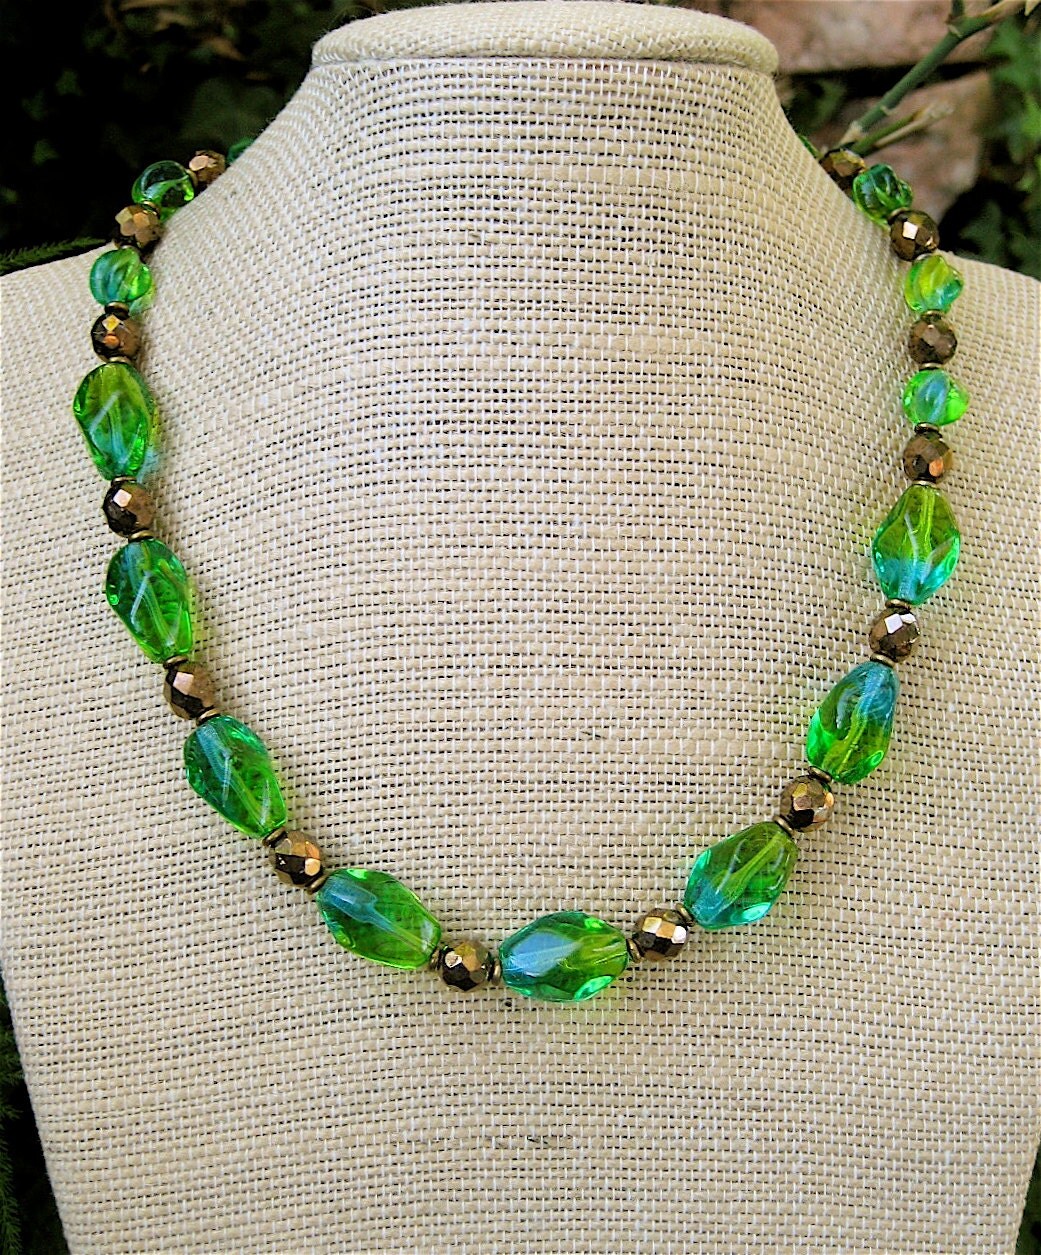 Vintage Blue Green Glass Necklace with Large Faceted Old Czech Glass Beads Mermaid Colors Gorgeous Lime and Aqua - CatchingWaves